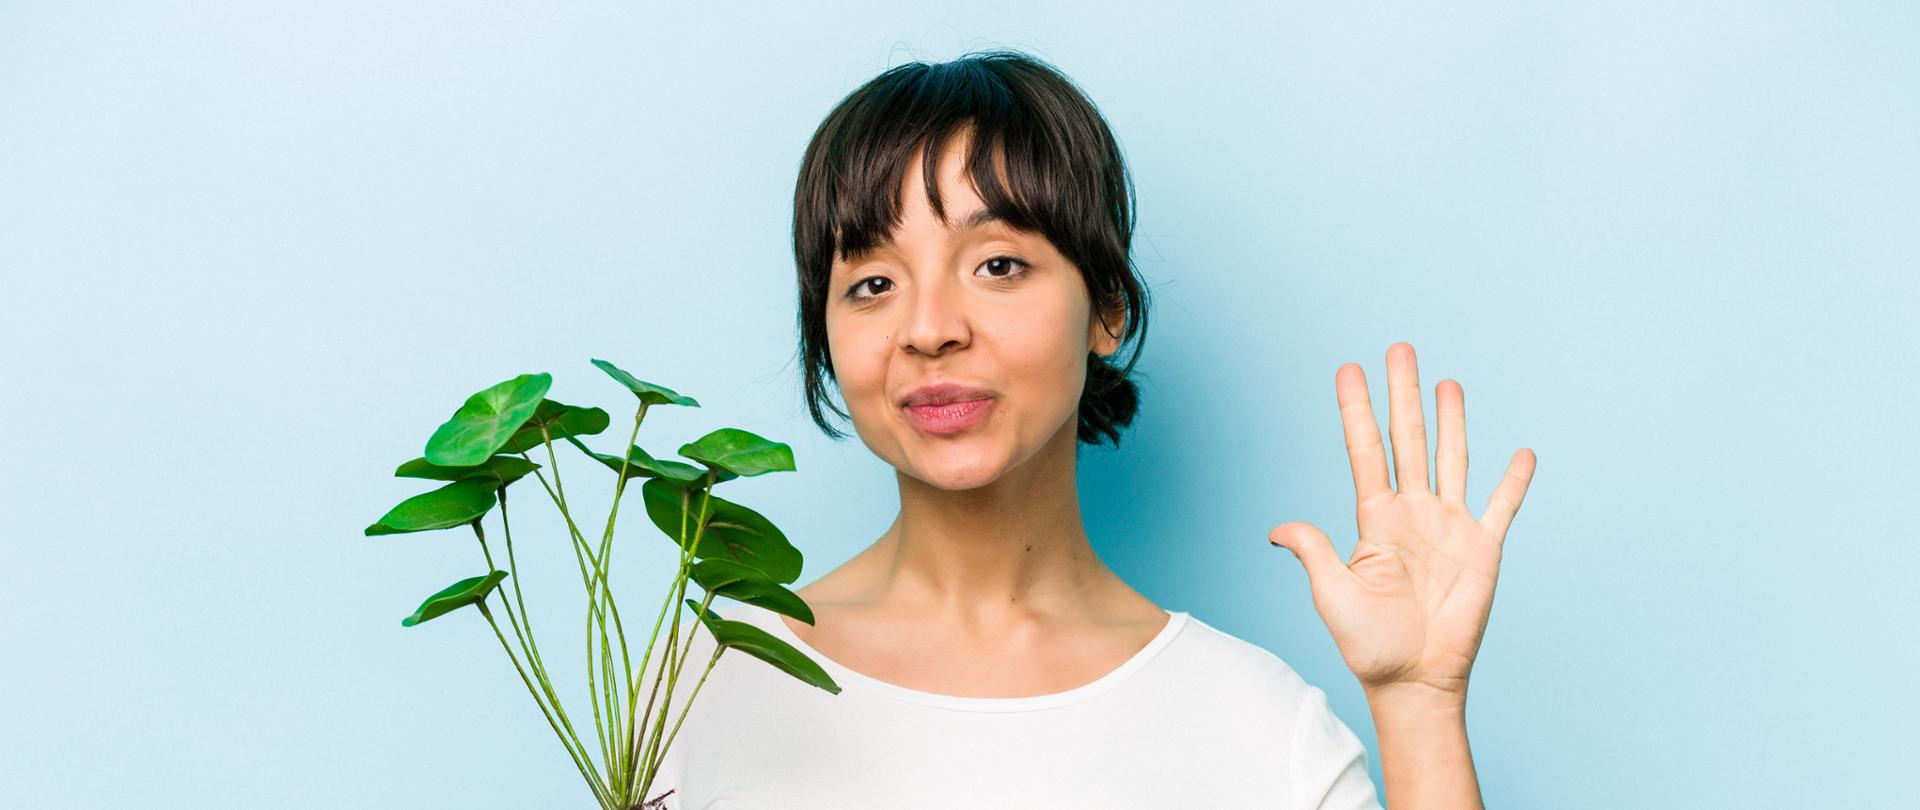 Young hispanic woman holding a plant isolated on blue background smiling cheerful showing number five with fingers.